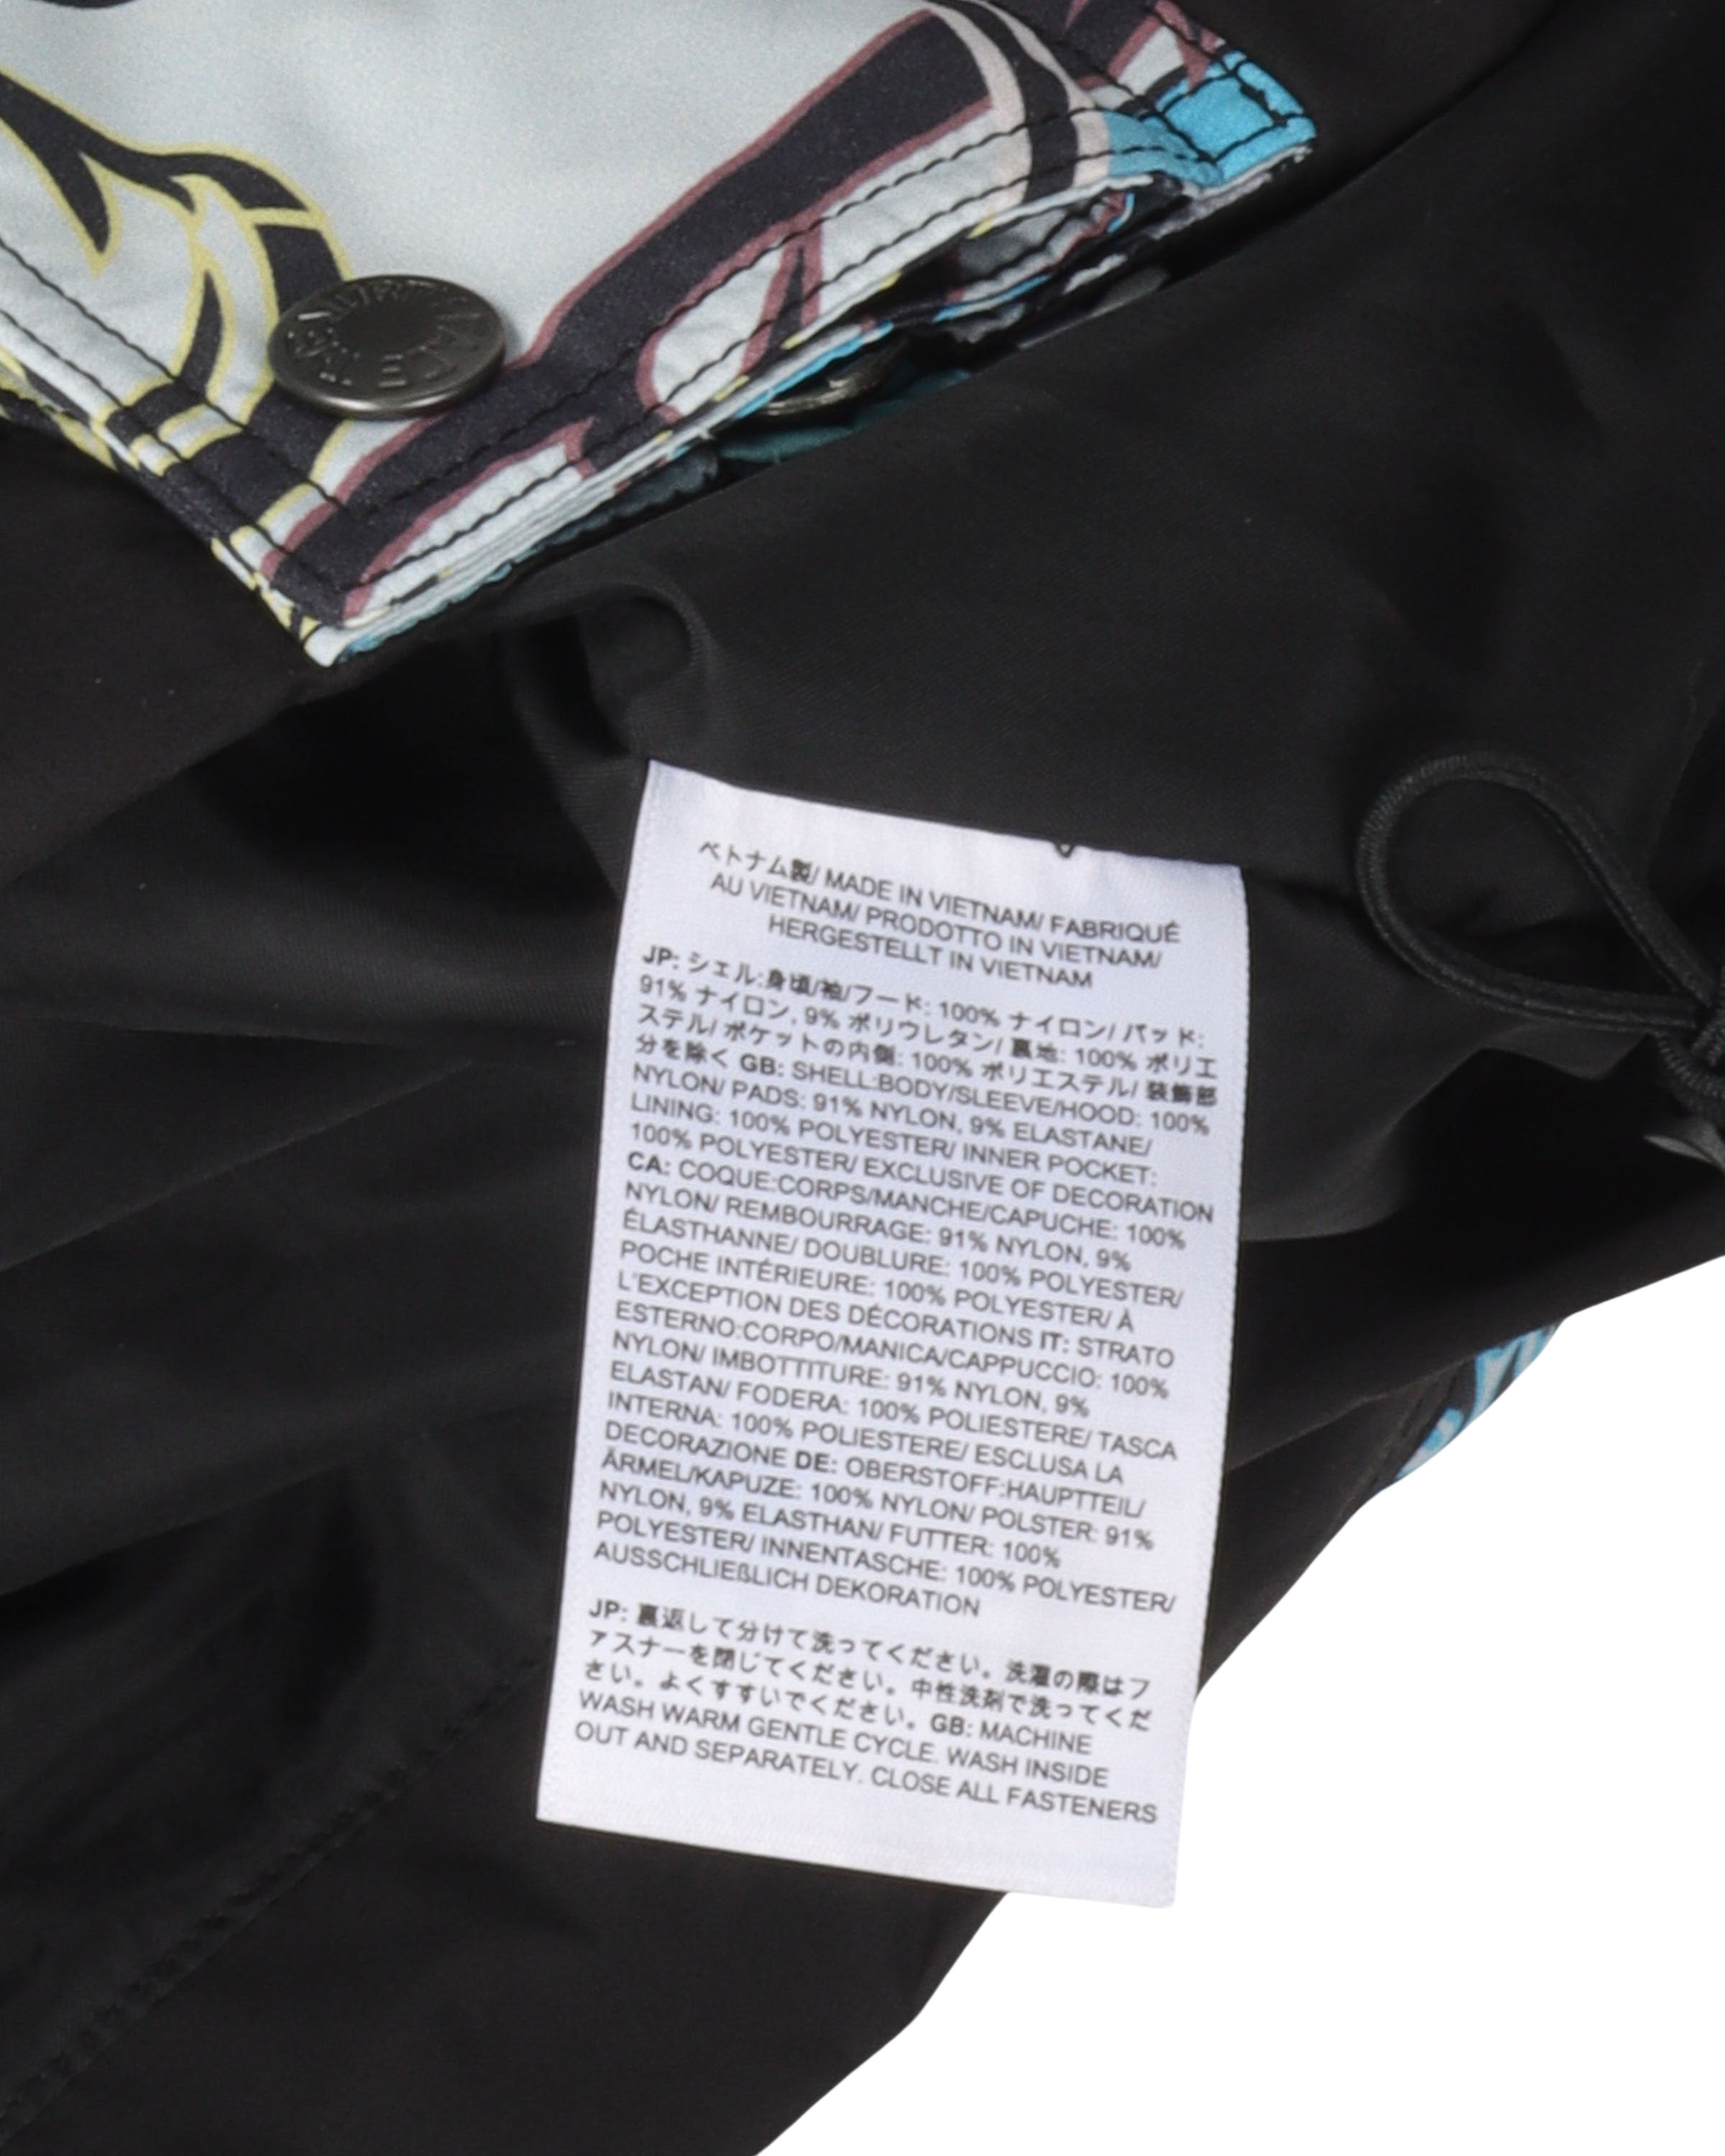 The North Face Steep Tech Apogee Jacket